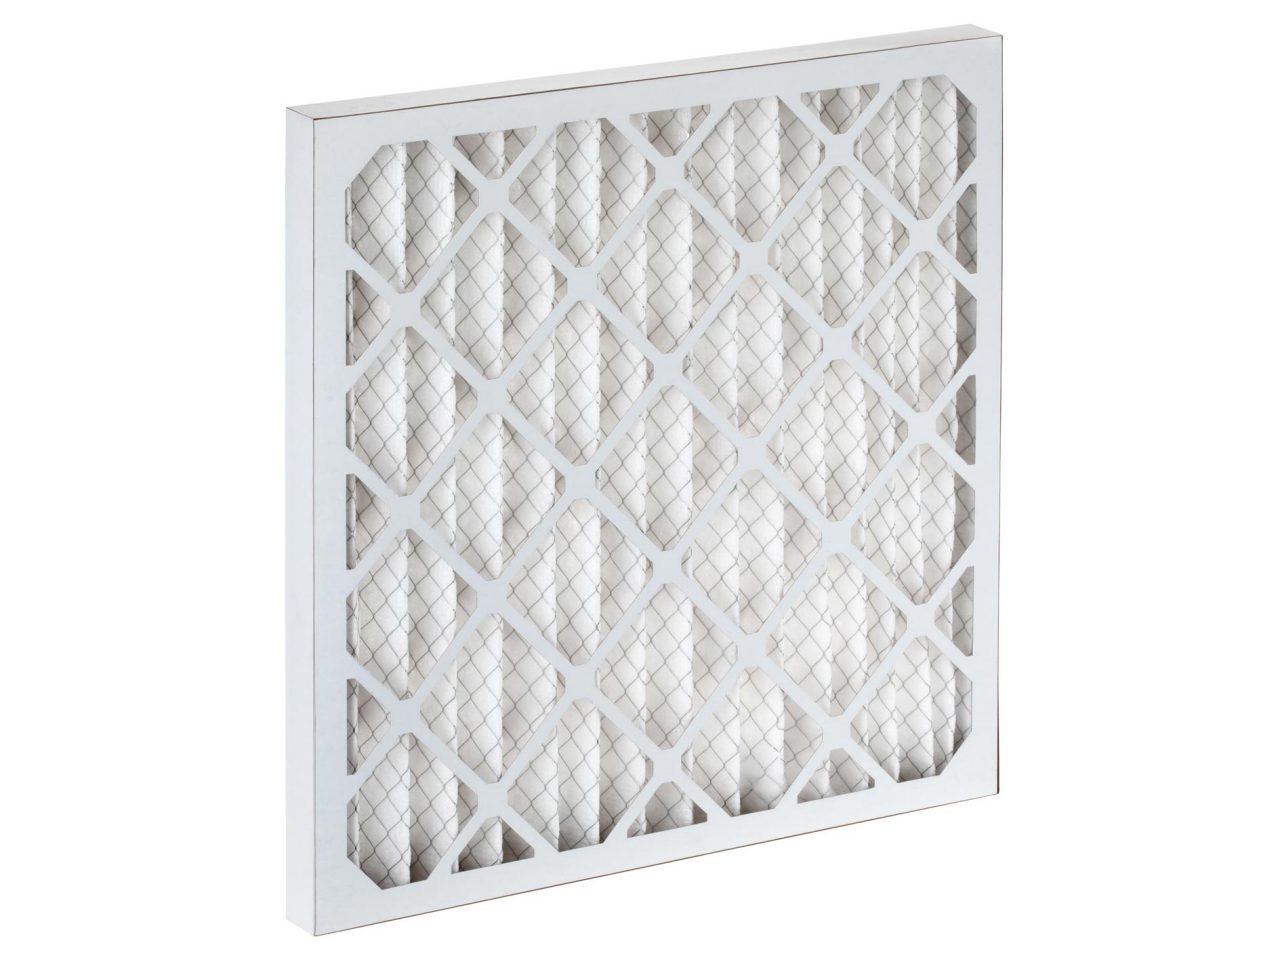  Airpanel Eco Synthetic veckat filter